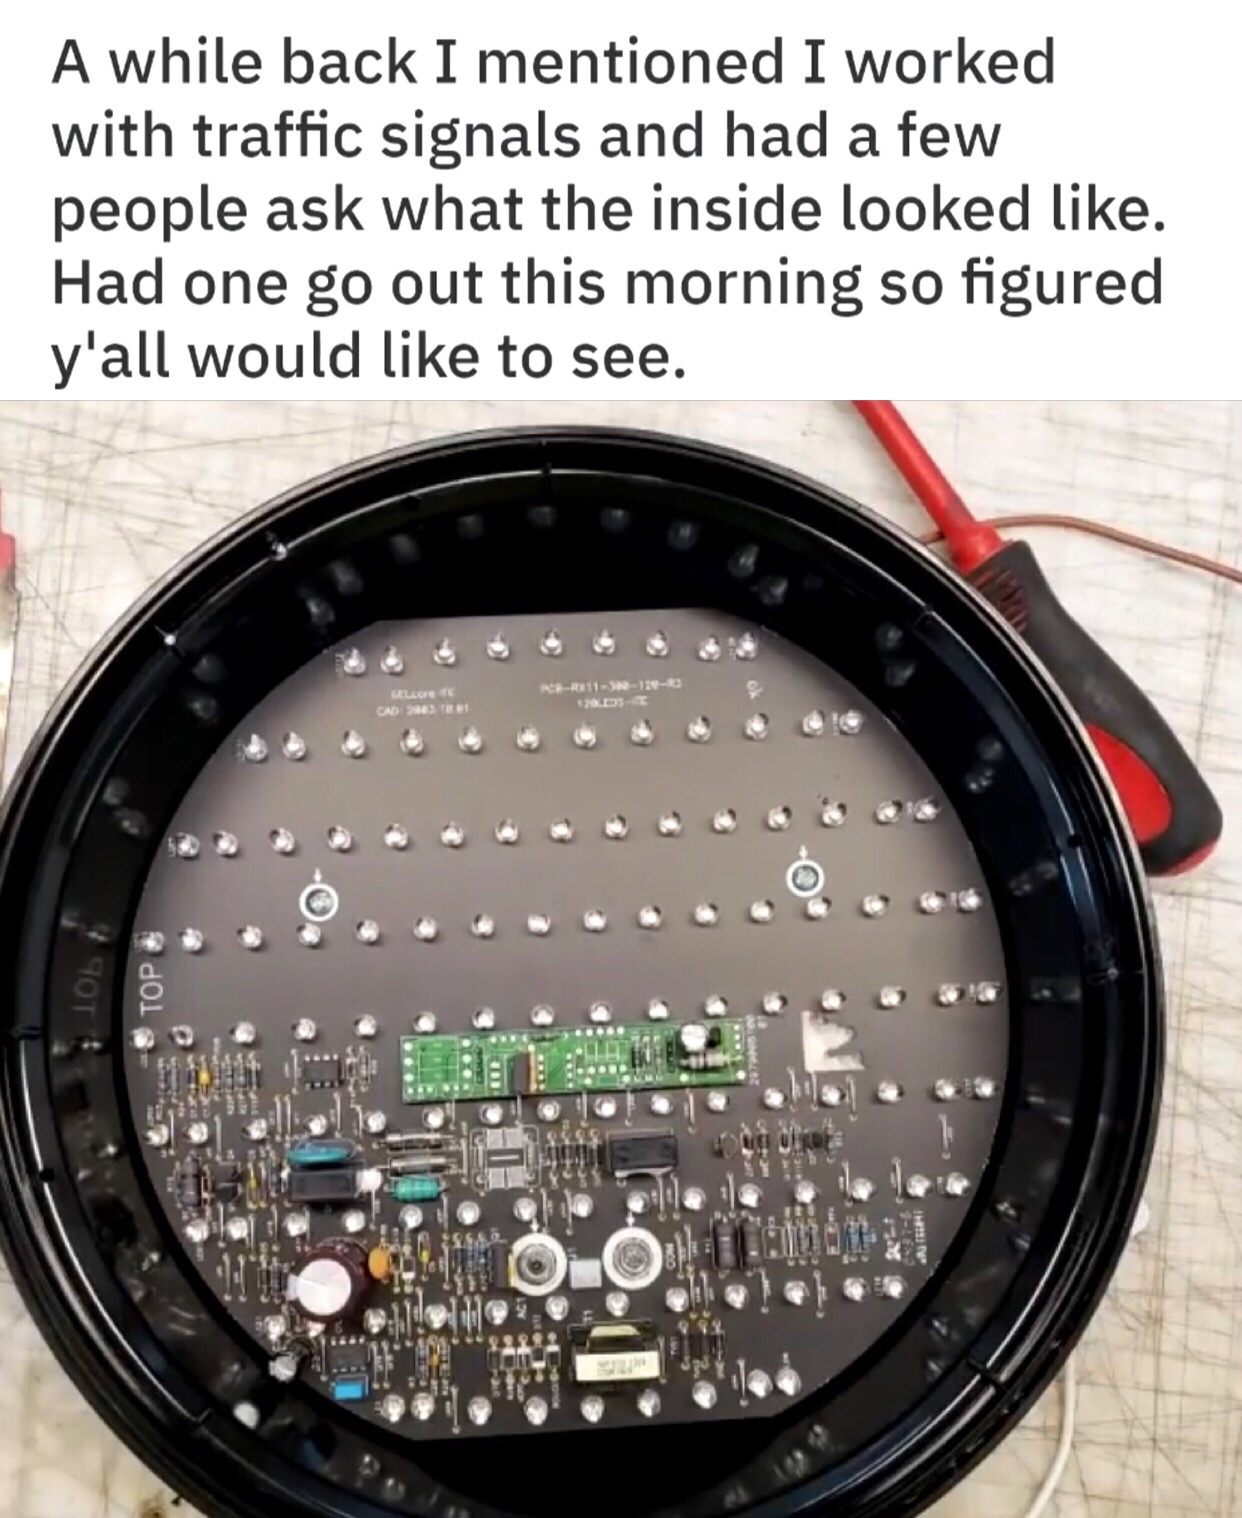 Traffic light - A while back I mentioned I worked with traffic signals and had a few people ask what the inside looked . Had one go out this morning so figured y'all would to see. Lg Cad 2081 Tot Top